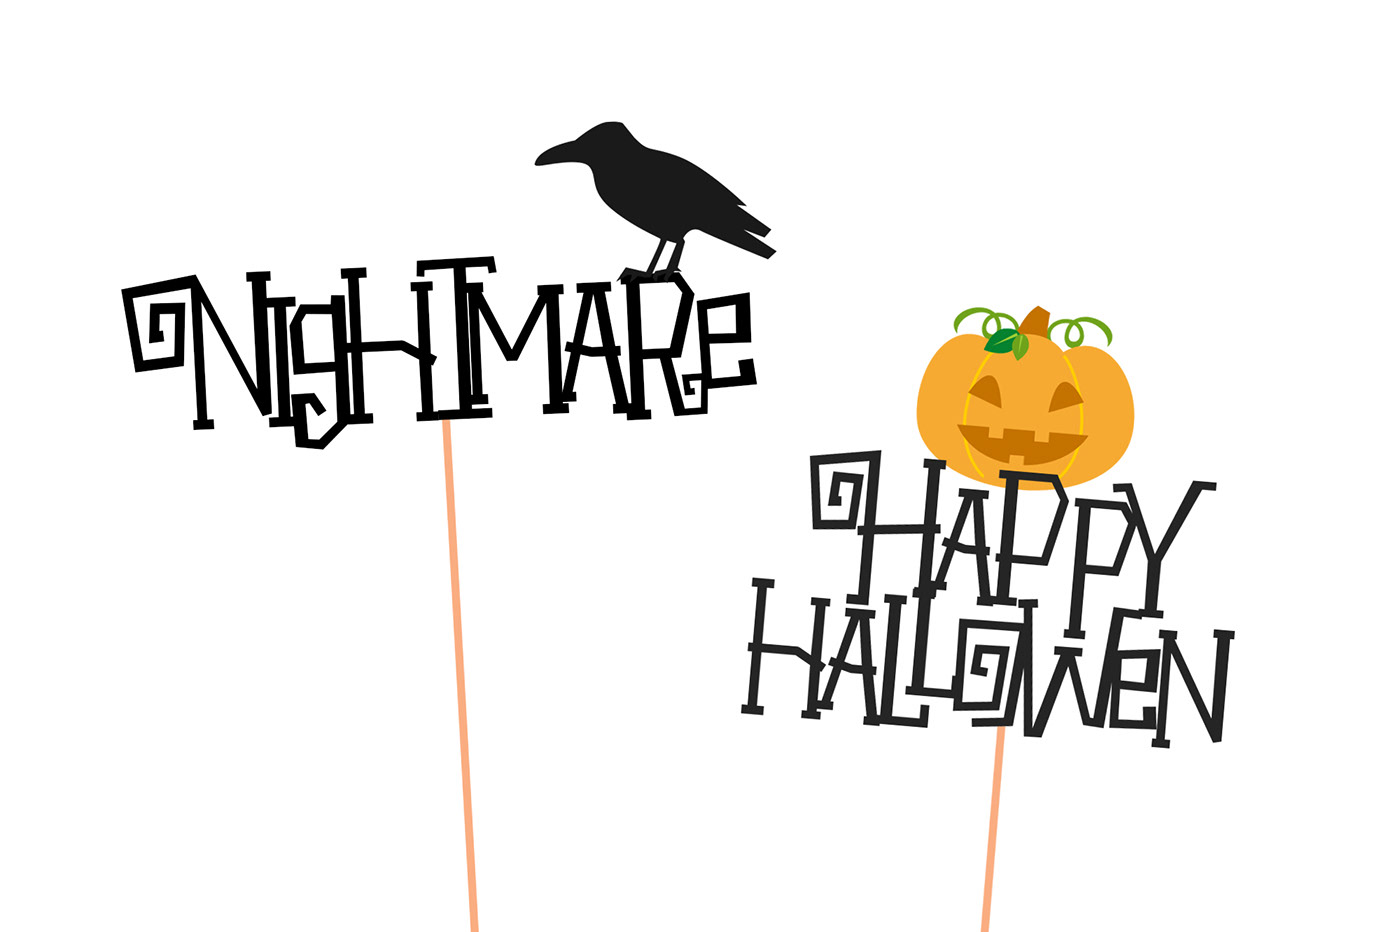 Example font Halloween Attack #4